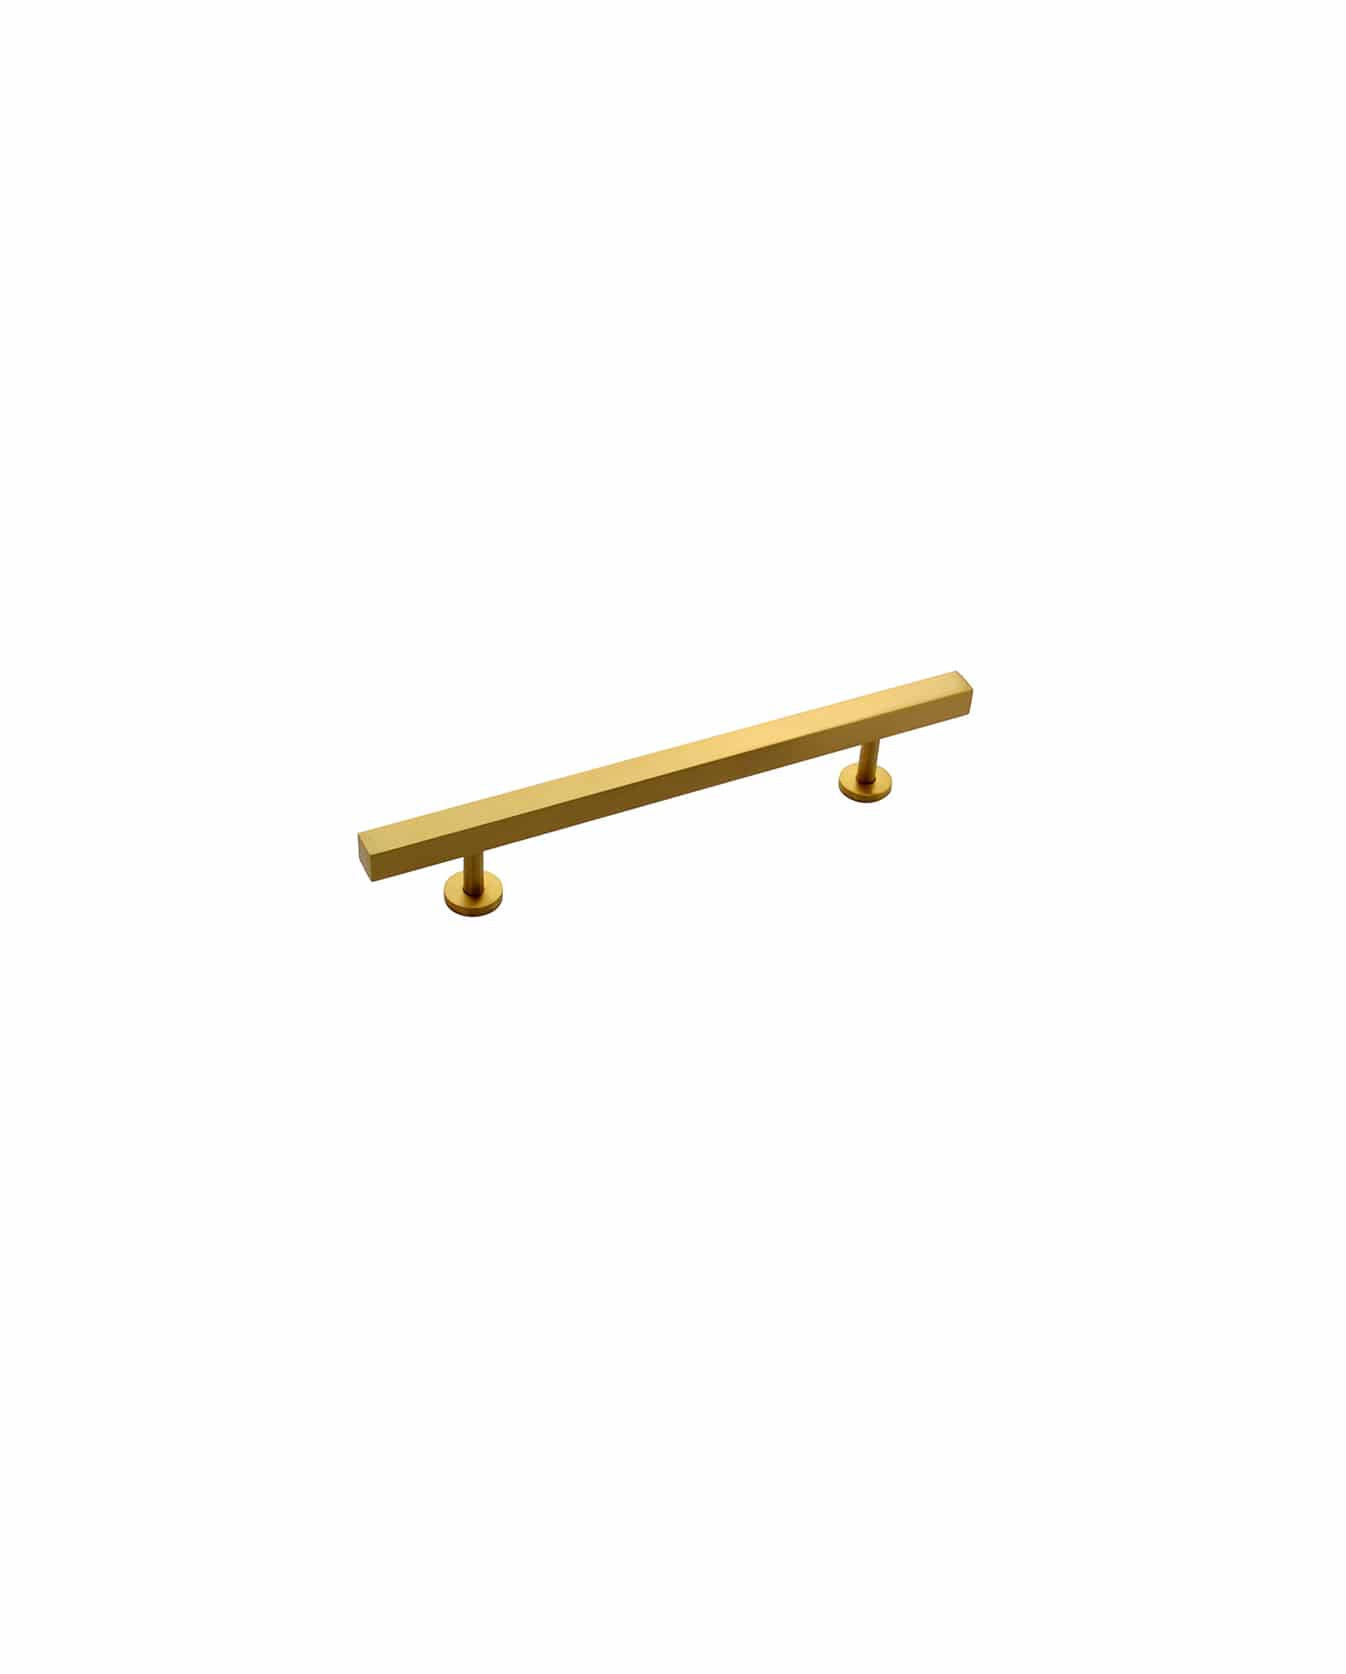 Cabinet Pull Square Bar,square bar handle pull for kitchen,5 inch pull handles for kitchen,pull handles for dresser drawers,brushed brass drawer pull handle,polished nickel drawer pull handle,satin nickel drawer pull handle,brass pull handle for kitchen cabinet,pulls 5 inch,Brass pull,Hand crafted pull,square shape pull,pull for kitchens,pull for doors,pull for drawers,pull for Vanity,pull for Dressers,Brushed Brass pull,square pull handle 5,modern cabinet pulls,Kitchen hardware,Modern design pulls,Satin brass pulls,dresser pull handle,Cabinet handles,brass handles pull,vanity handles pull,Kitchen handles,Small drop handles,golden handles pull,square bar pull